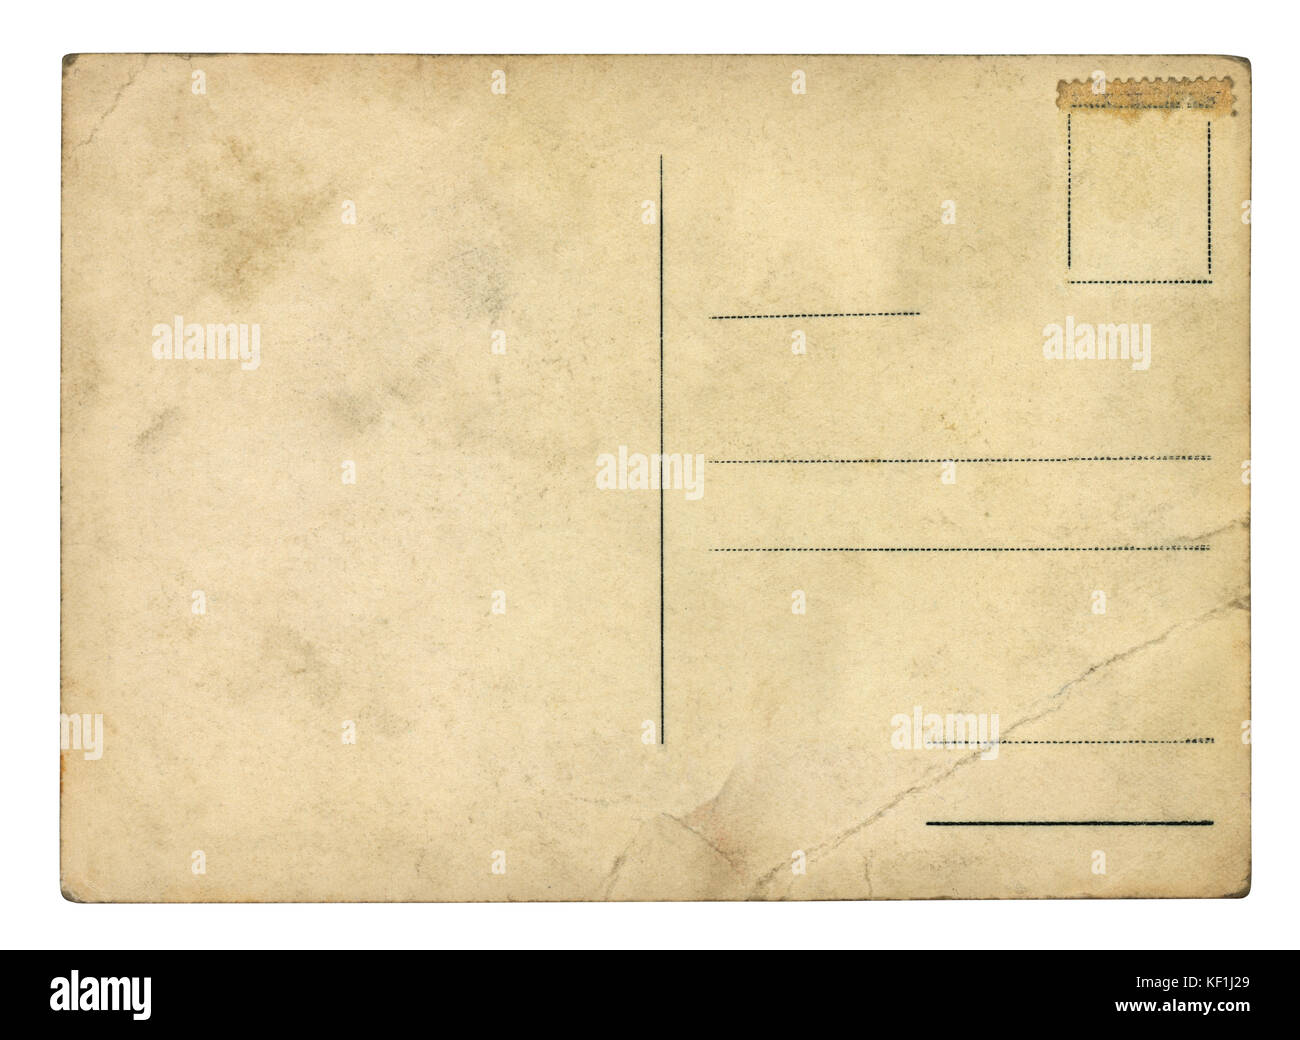 Antique Post card - isolated (clipping path included) Stock Photo